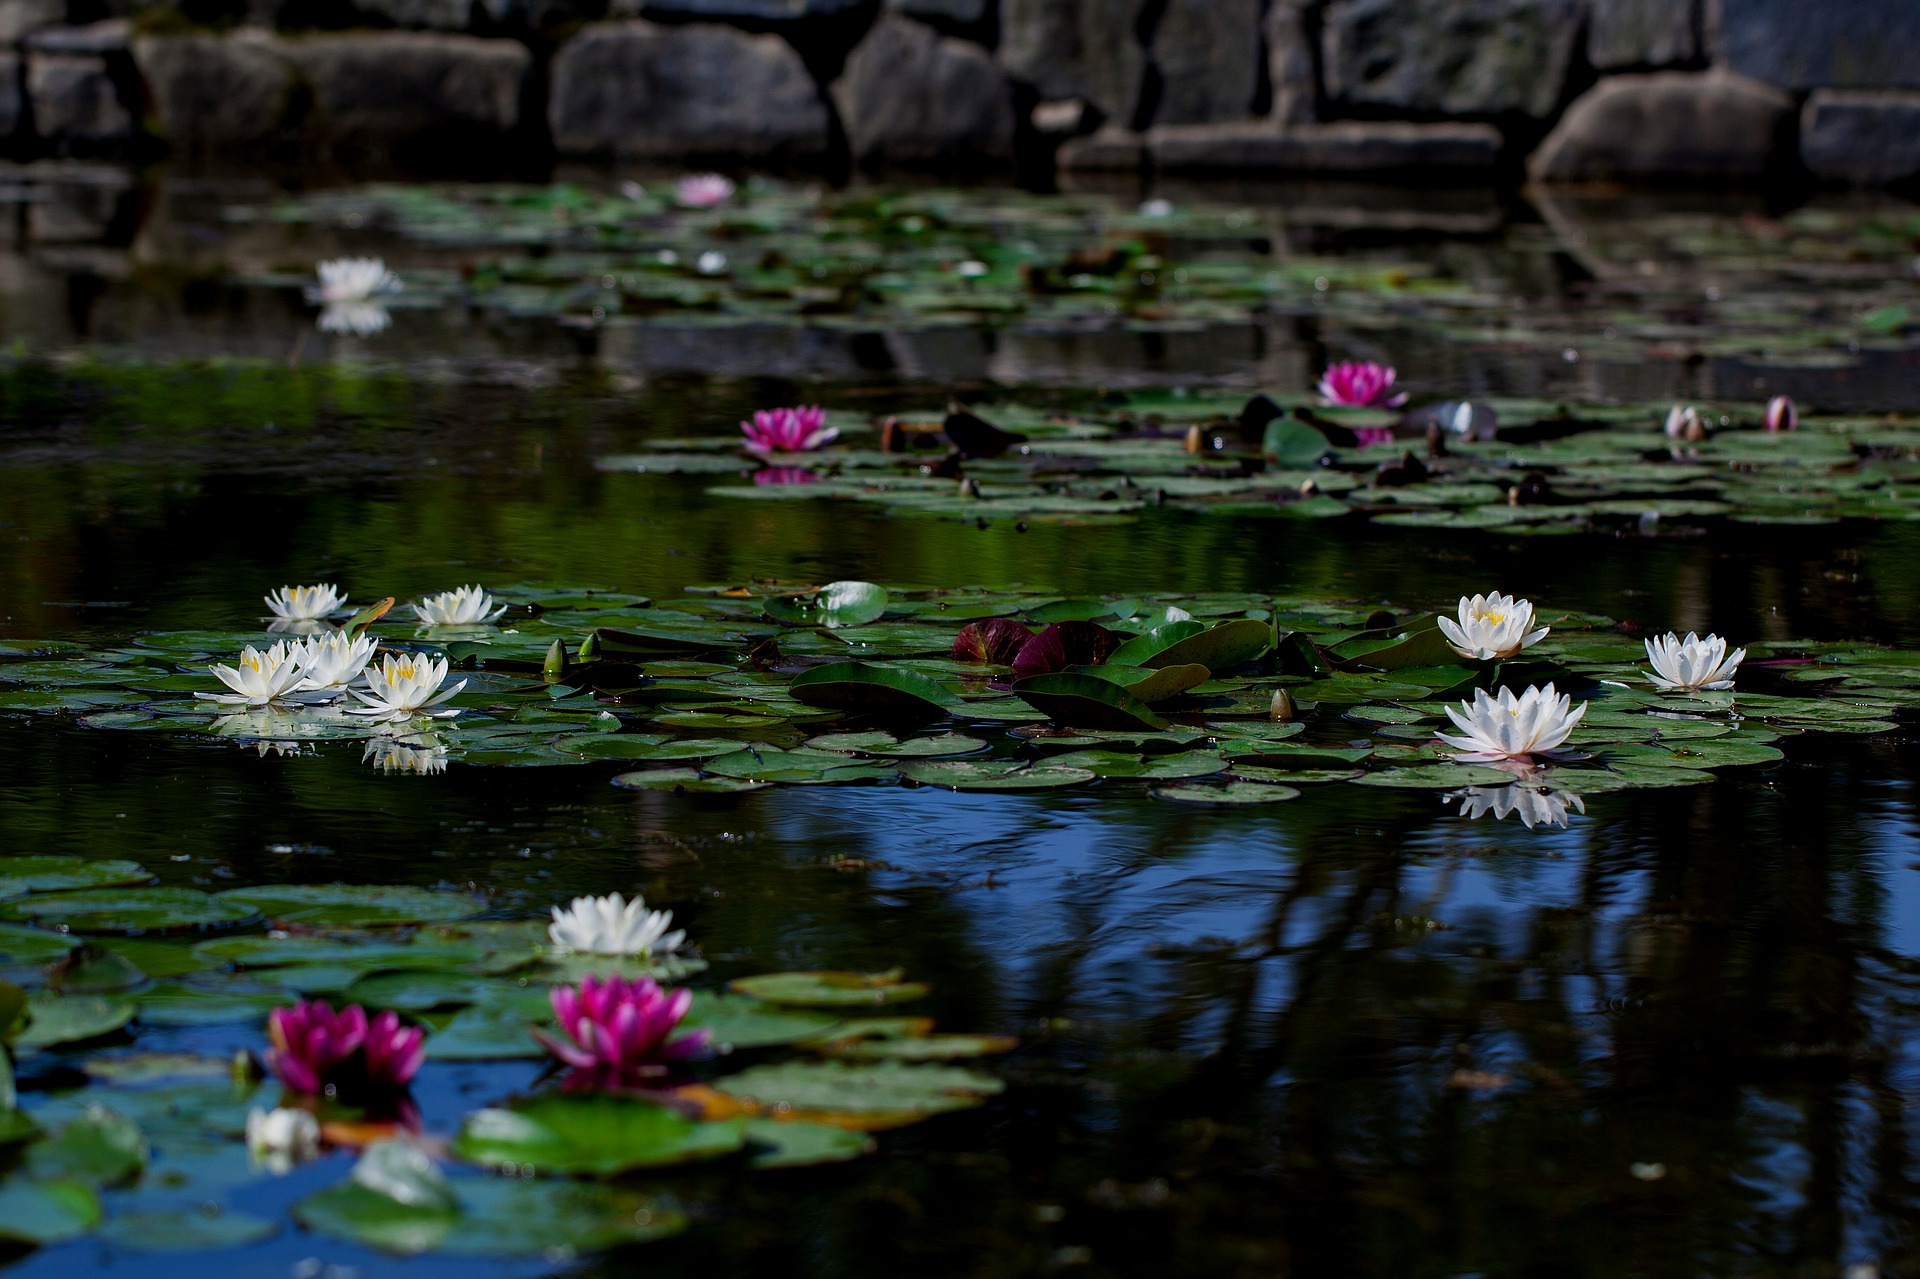 lily pond or natural pool